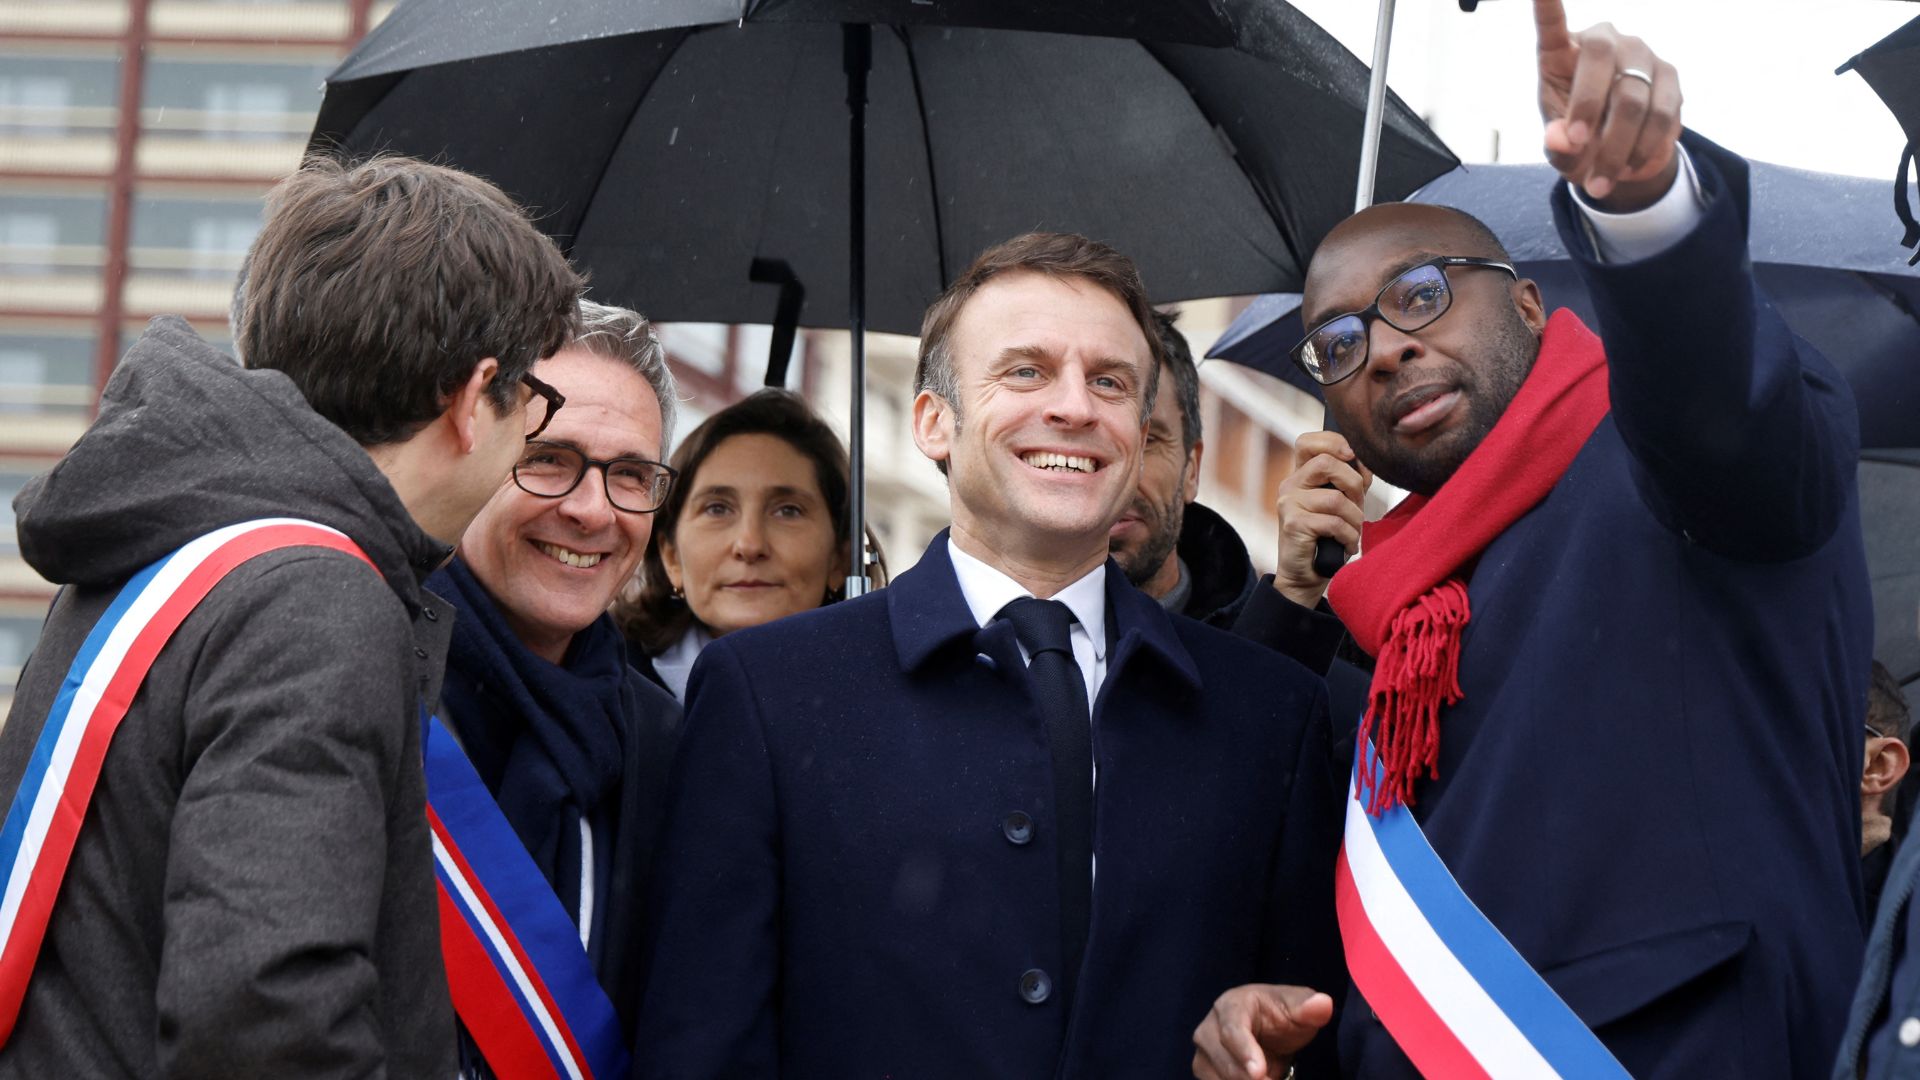 L'Ile-Saint-Denis' mayor Mohamed Gnabaly speaks with France's President Emmanuel Macron during the inauguration. /Ludovic Marin/Pool via Reuters